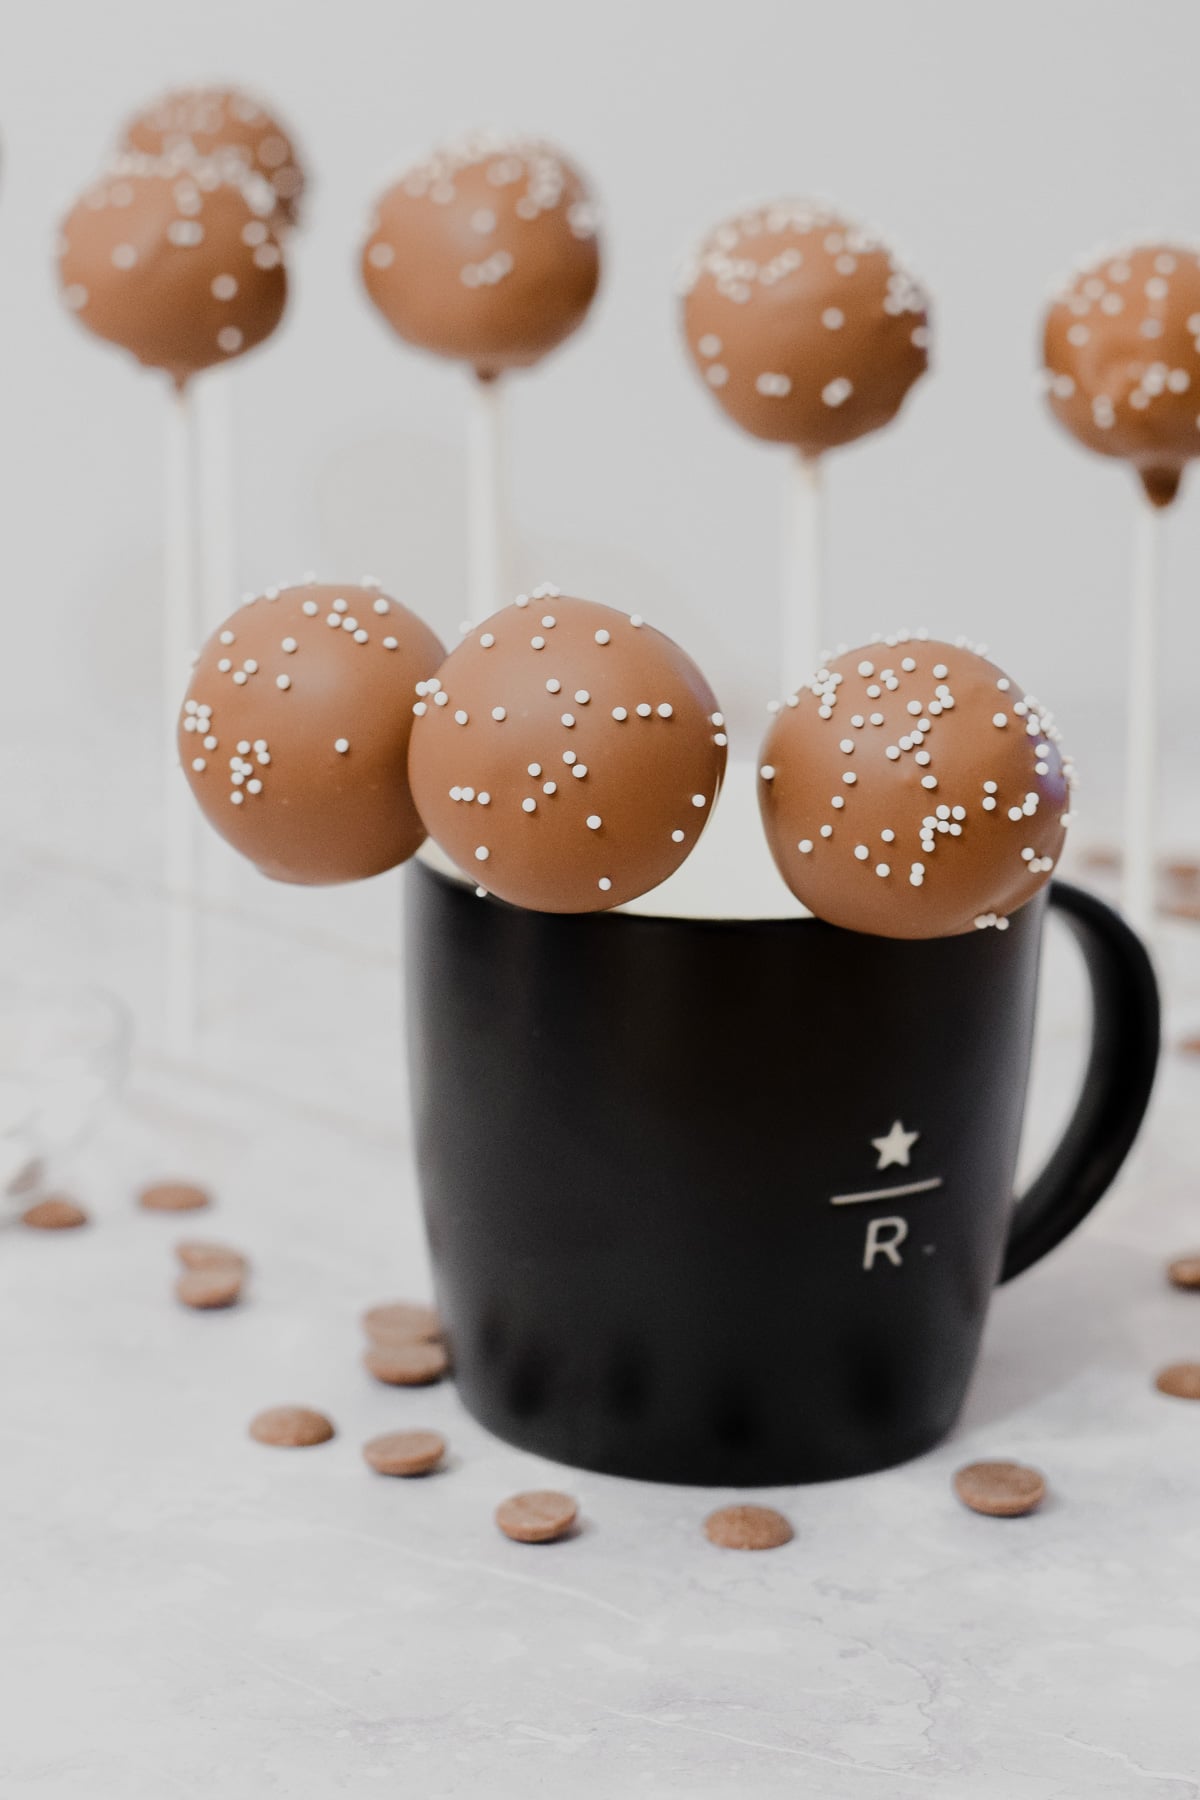 starbucks copycat chocolate coated chocolate cake pops with white sprinkles in a mug